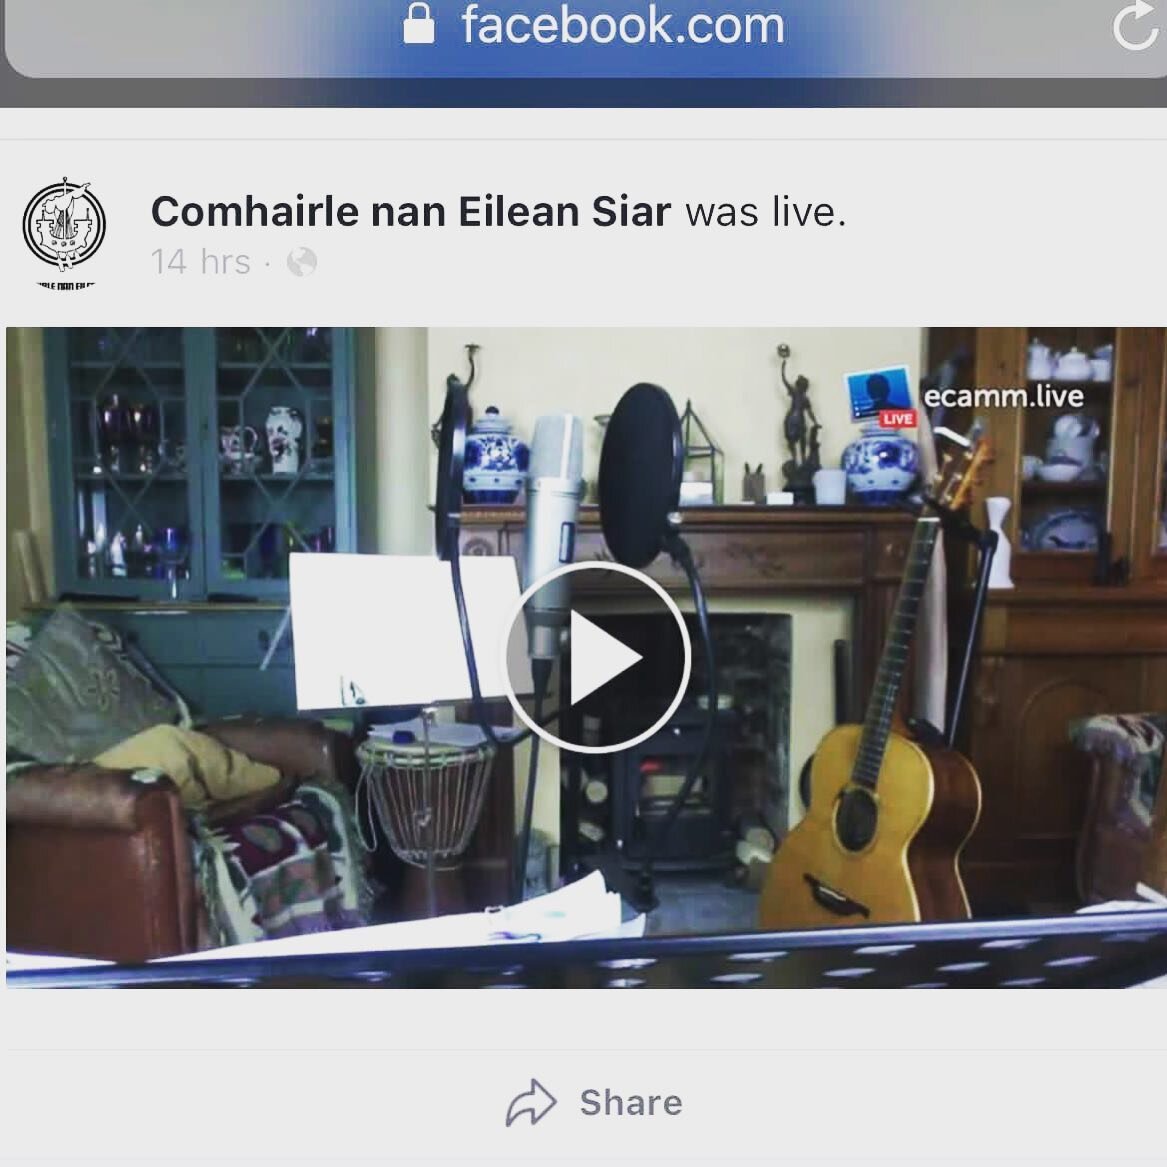 Hello everyone. My dad and I performed a live set of music for a Hebridean radio station on Friday night, which you can access via the - comhairle nan eilean siar - Facebook link. I hope you enjoy the Ceilidh as much as I did, it was a special experi